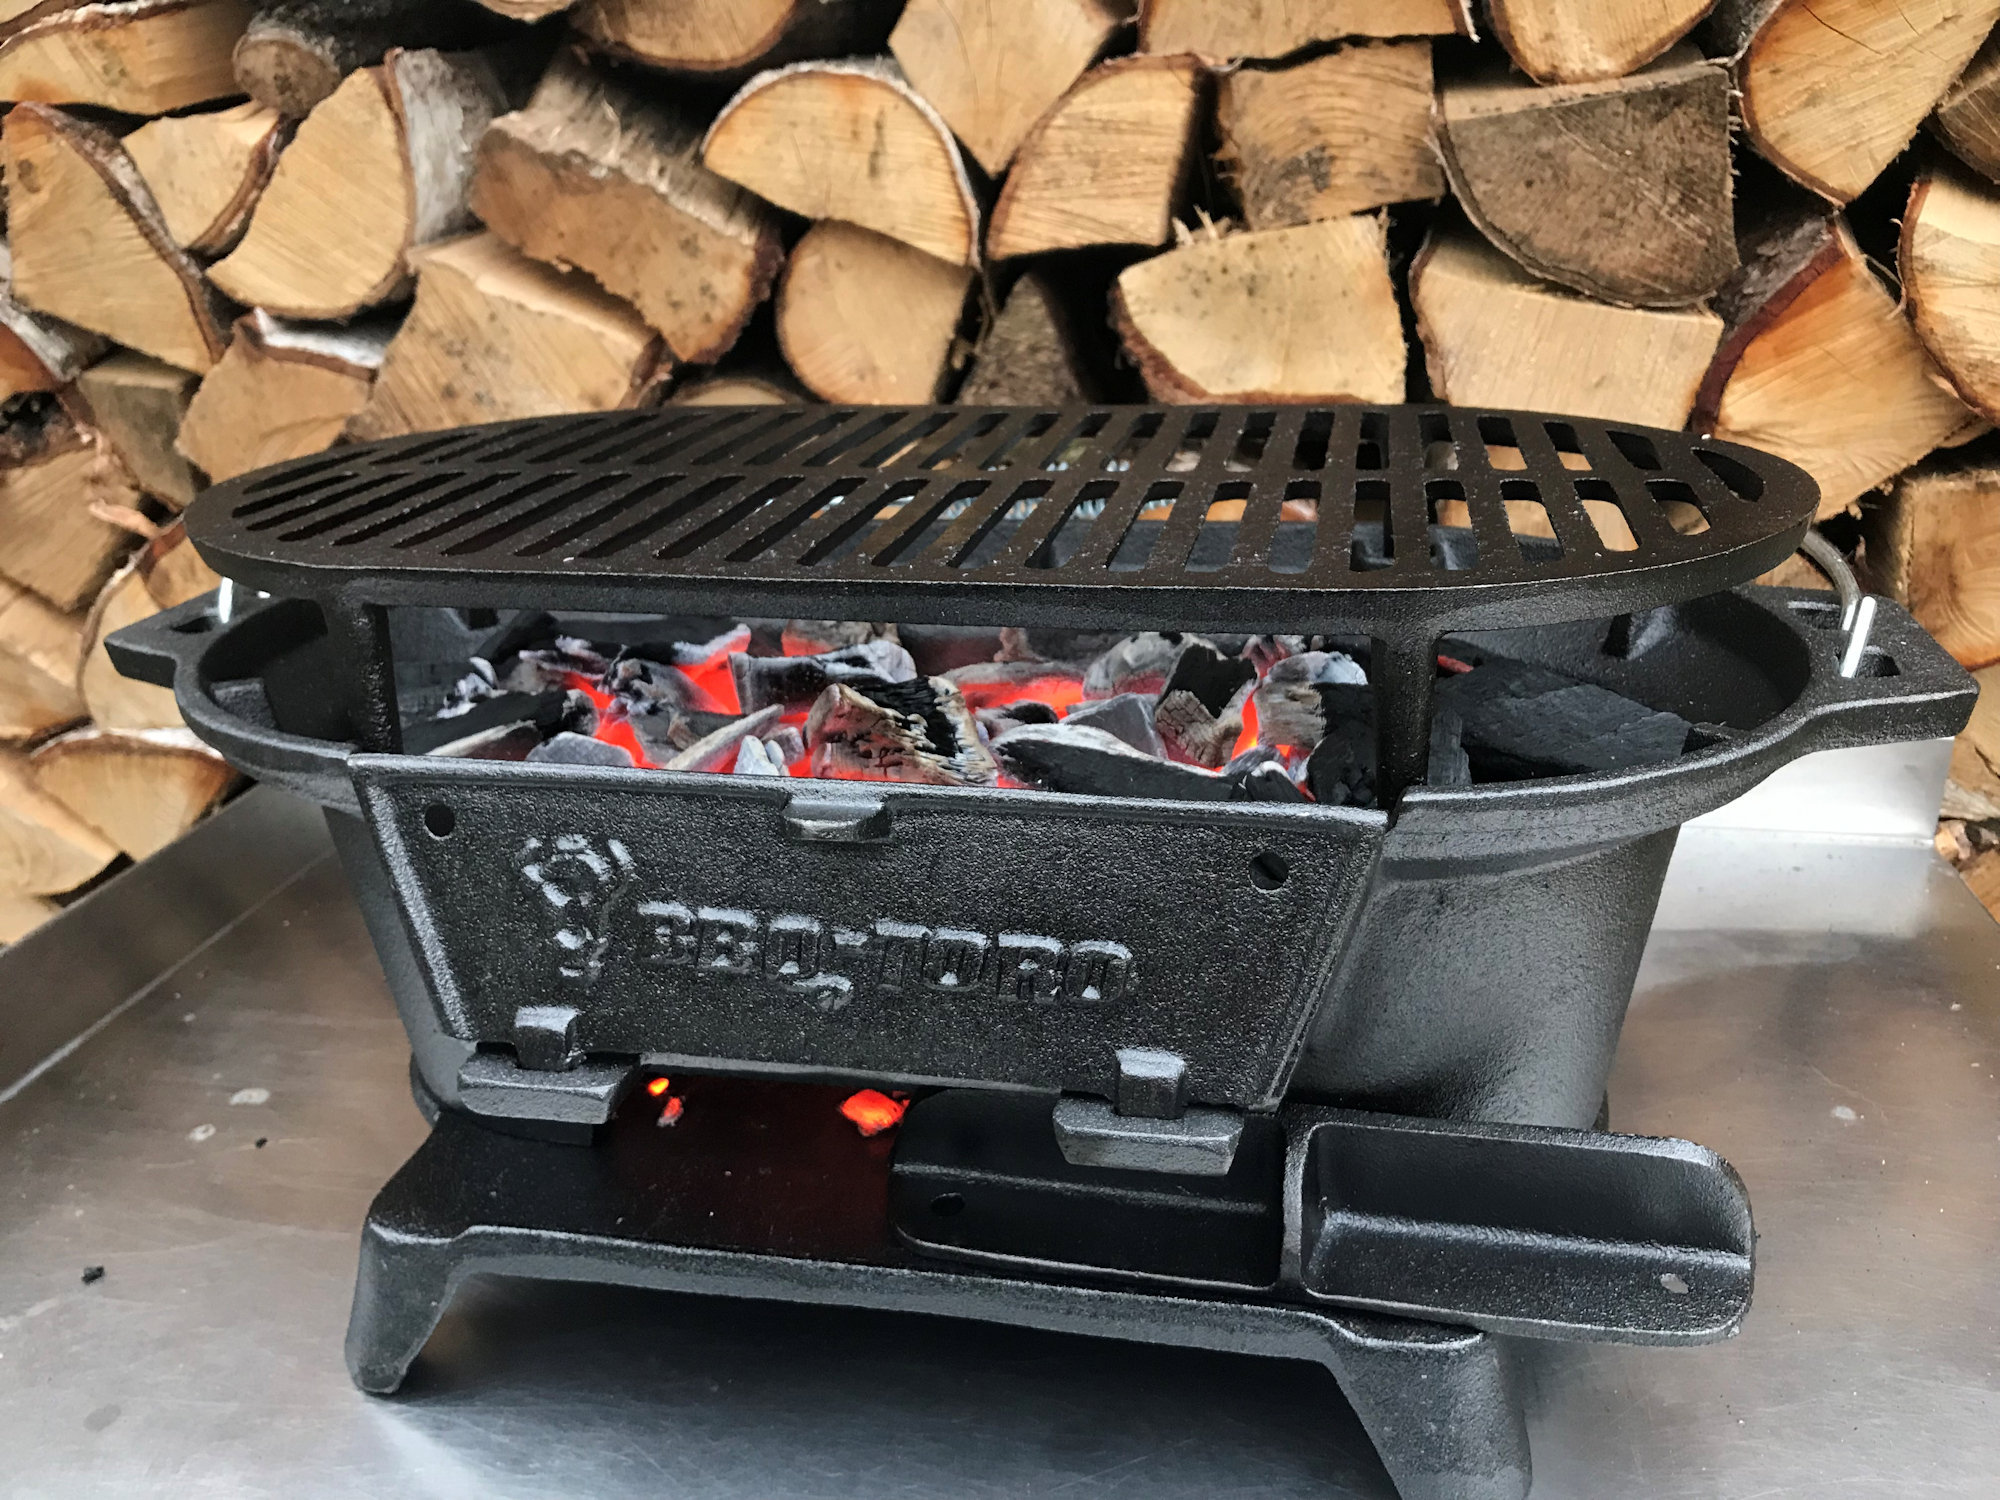 Grillrost eBay | mit BBQ-Toro Style Campinggrill Gusseisen Hibachi Holzkohle Grilltopf